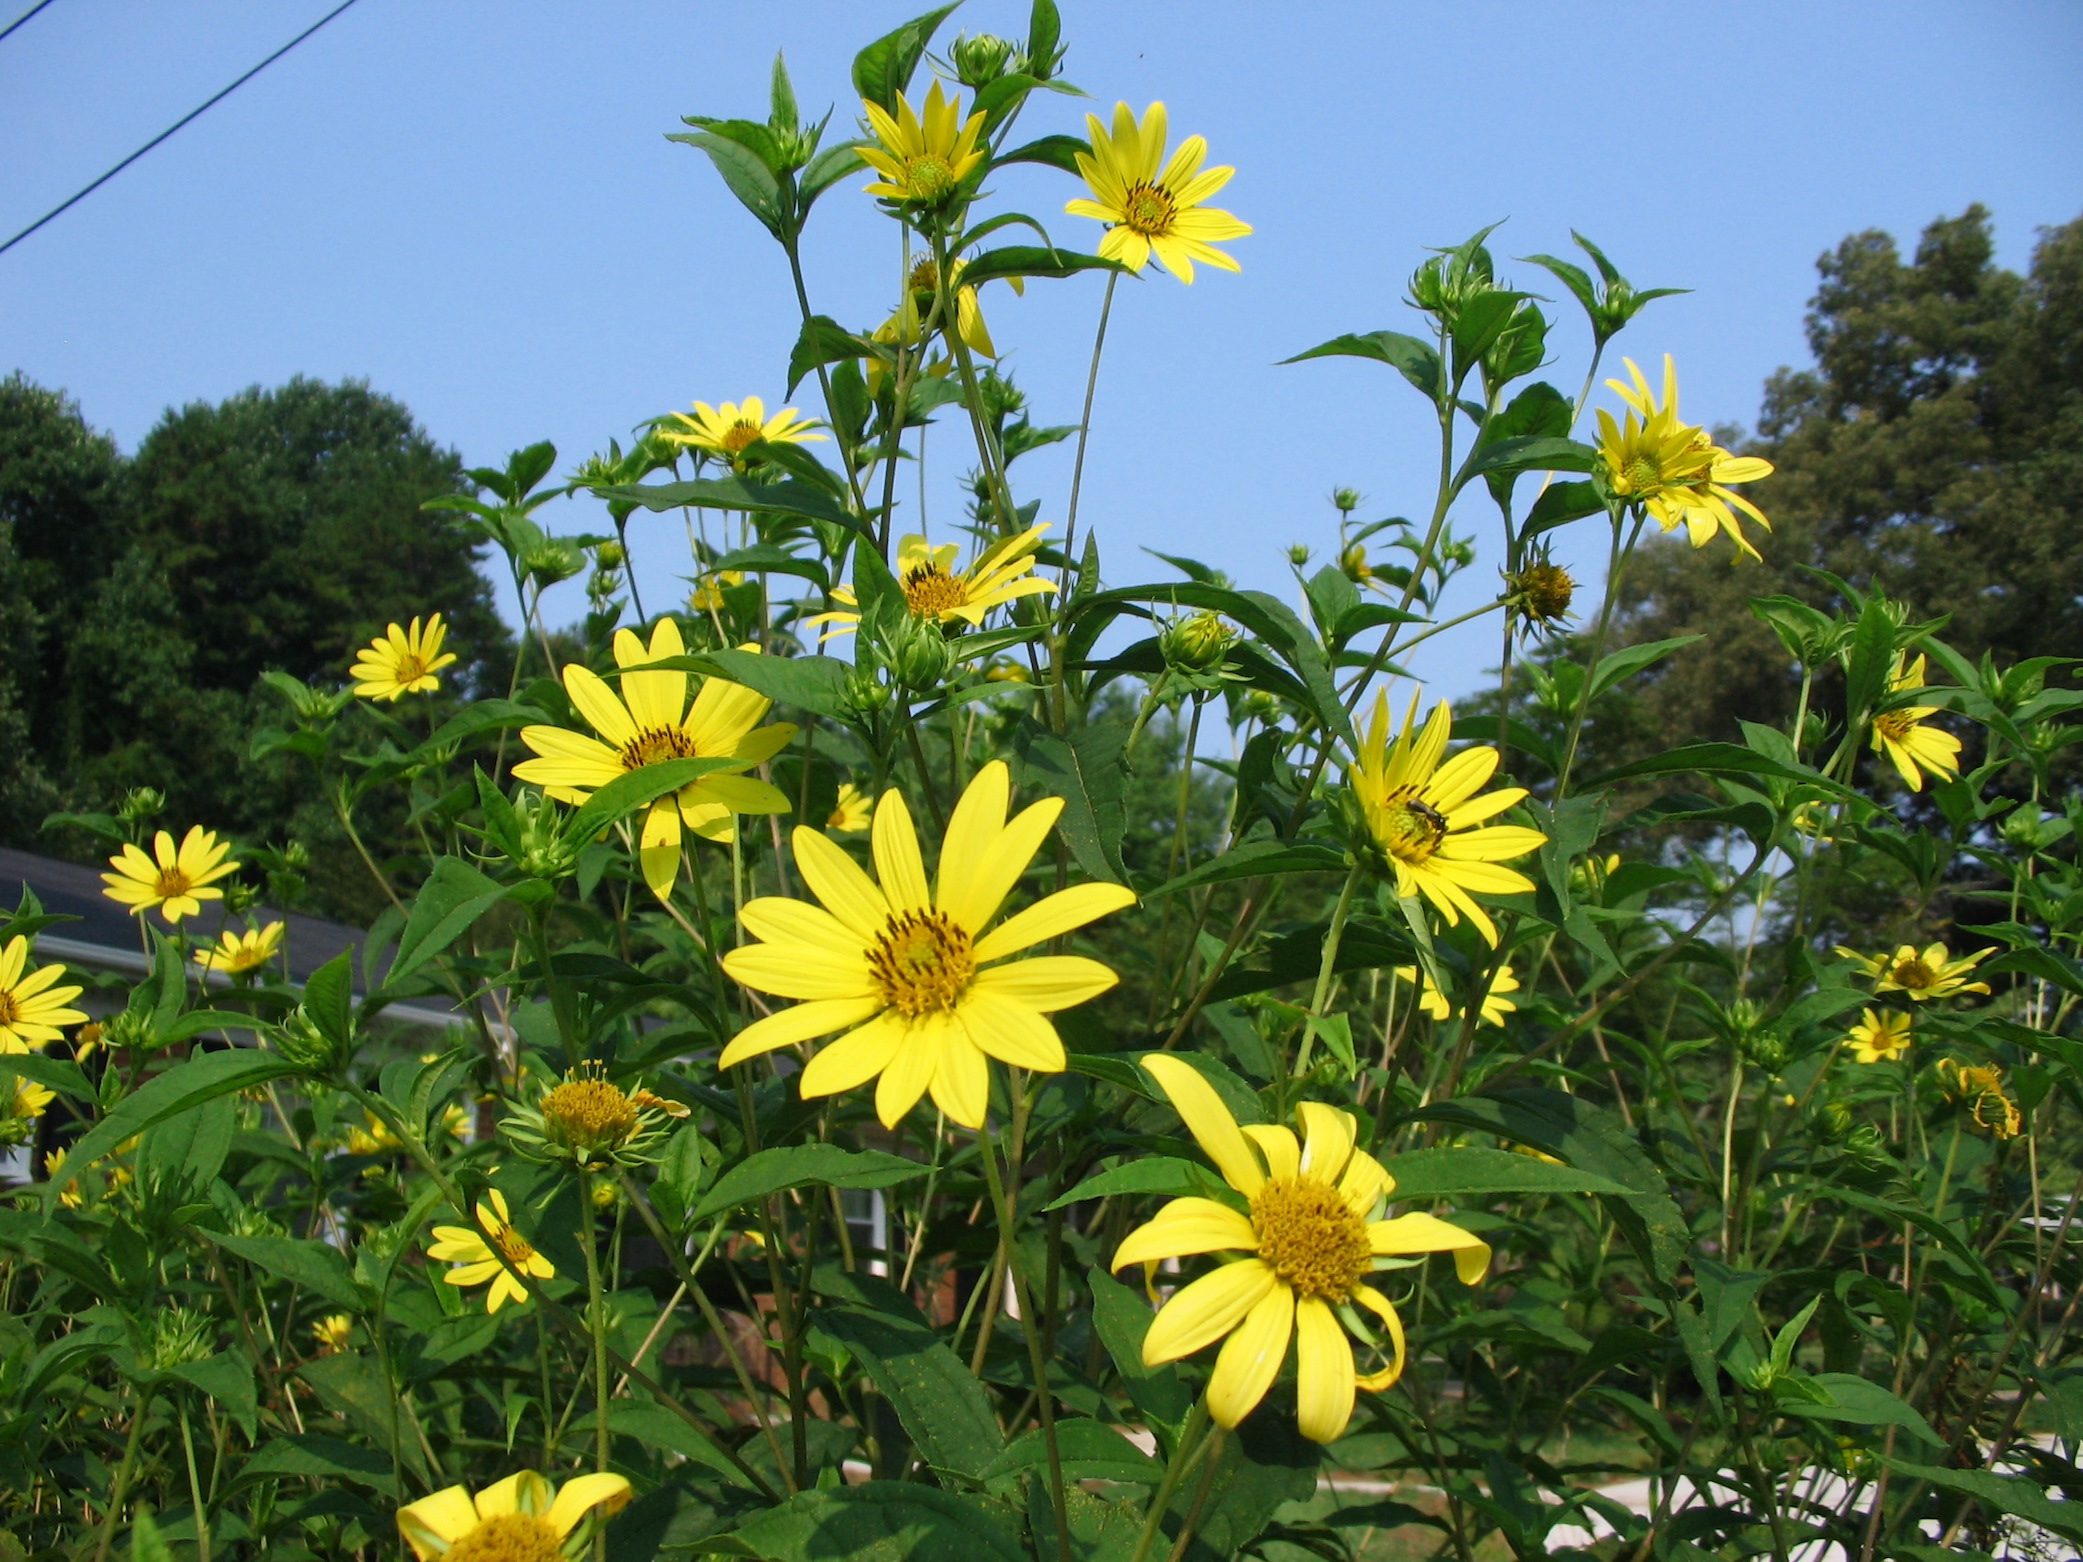 The Scientific Name is Helianthus strumosus. You will likely hear them called Paleleaf Sunflower, Paleleaf Woodland Sunflower, Roughleaf Sunflower. This picture shows the Colonial growth habit of Helianthus strumosus